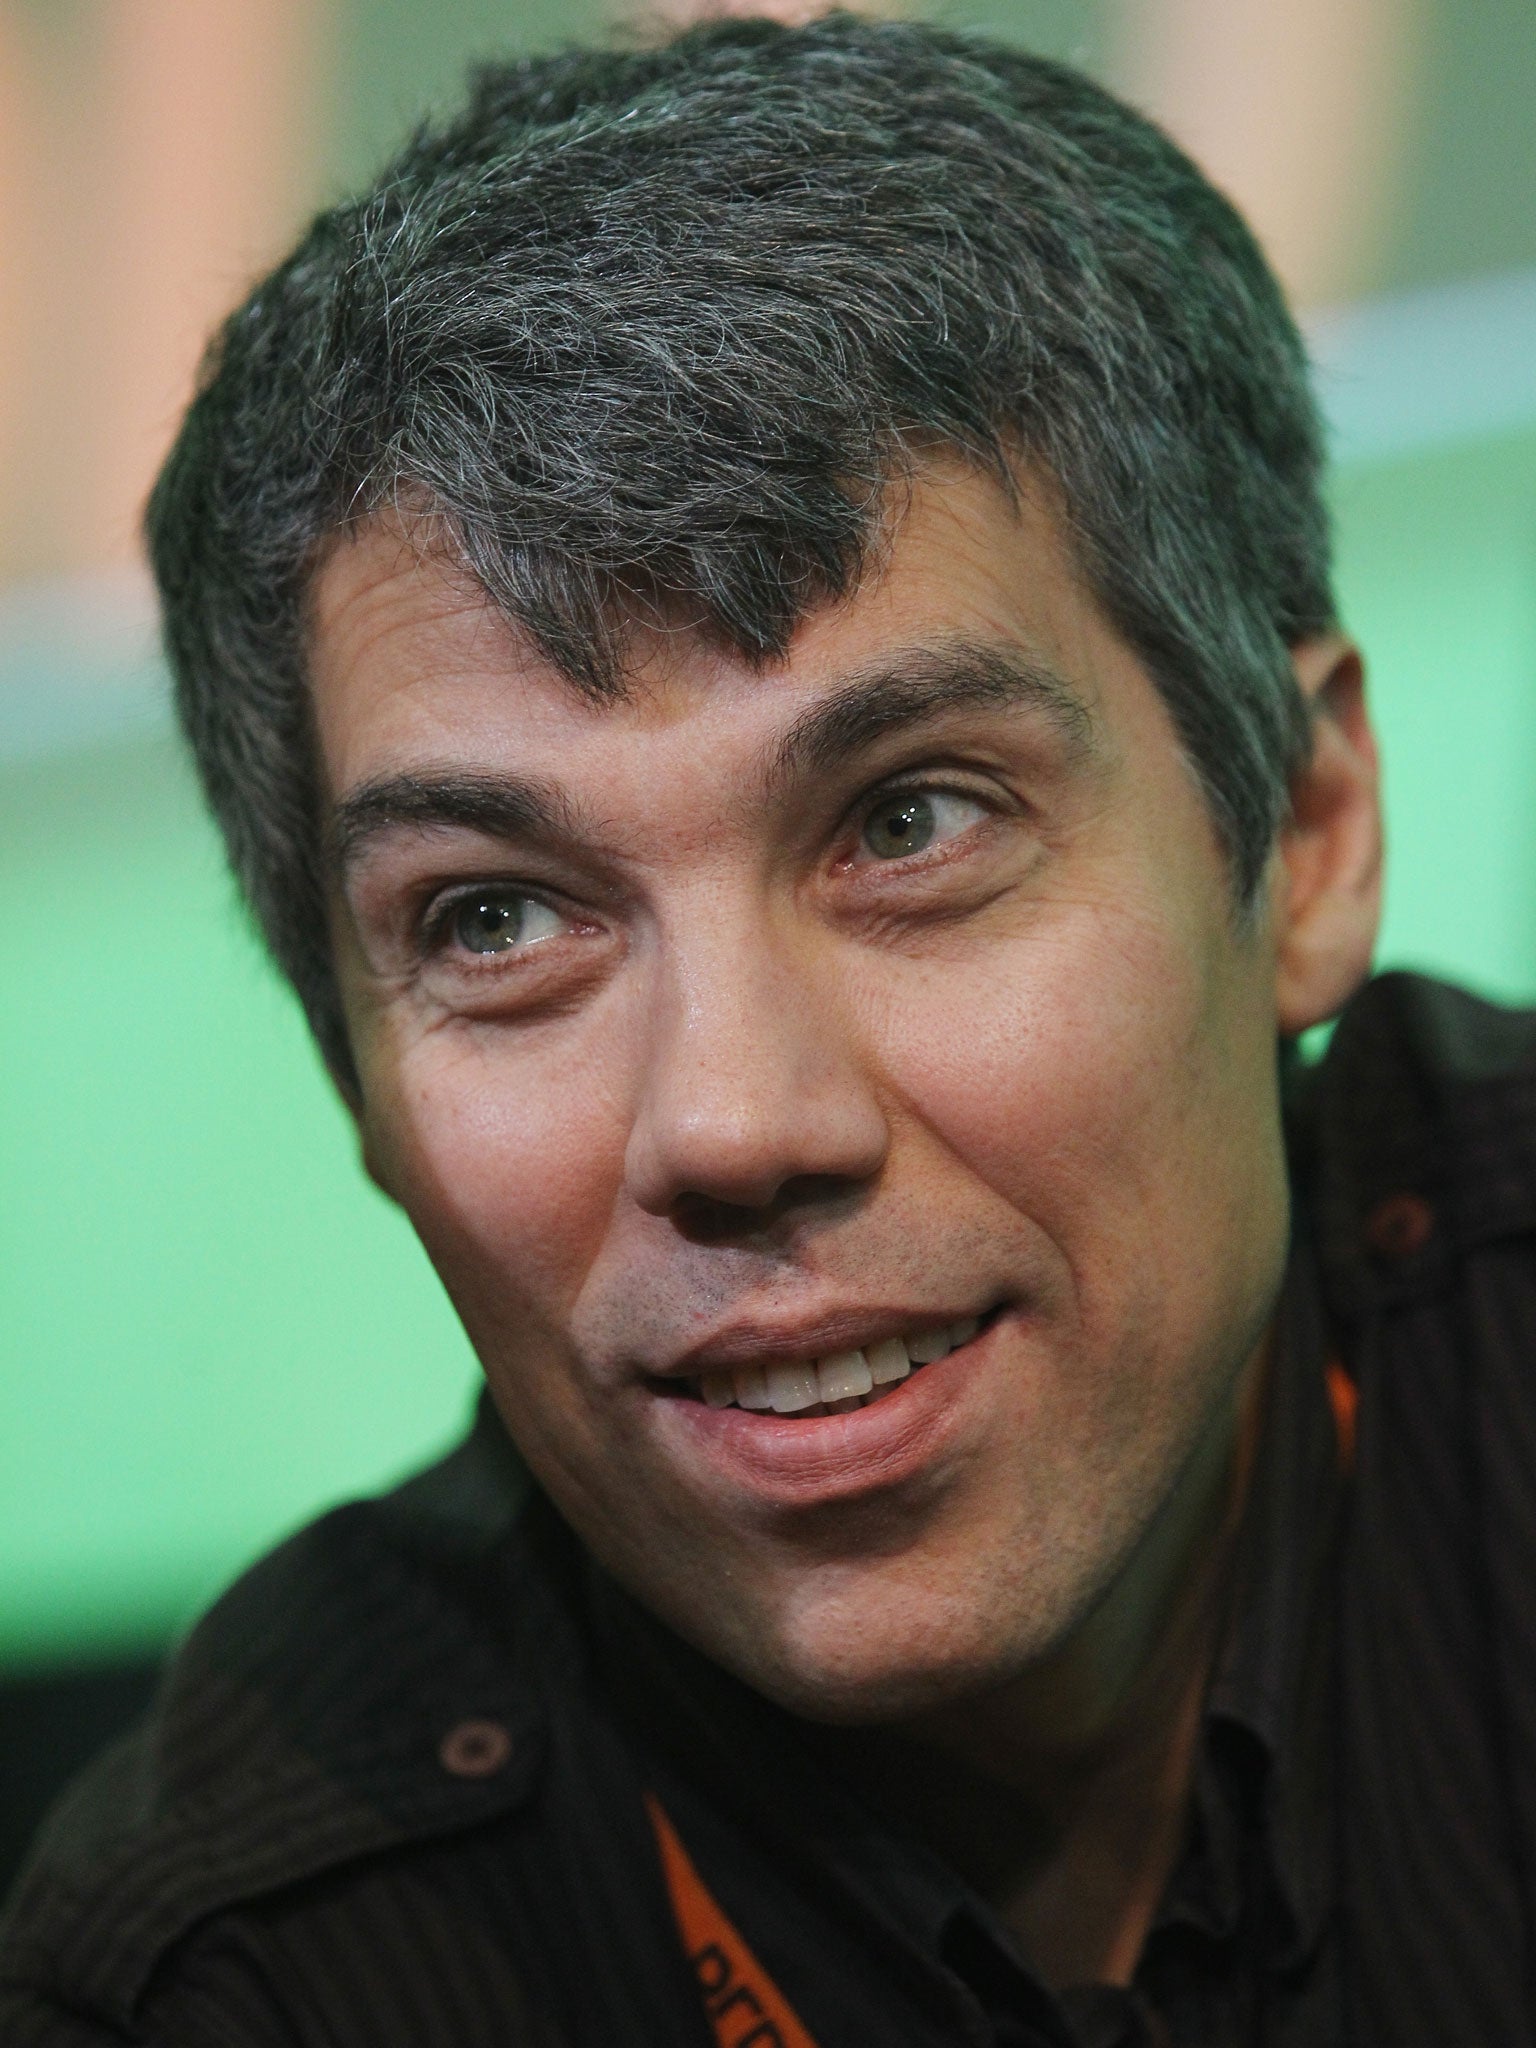 Ilya Segalovich was an internet pioneer and one of the founders of Yandex, the Russian search engine